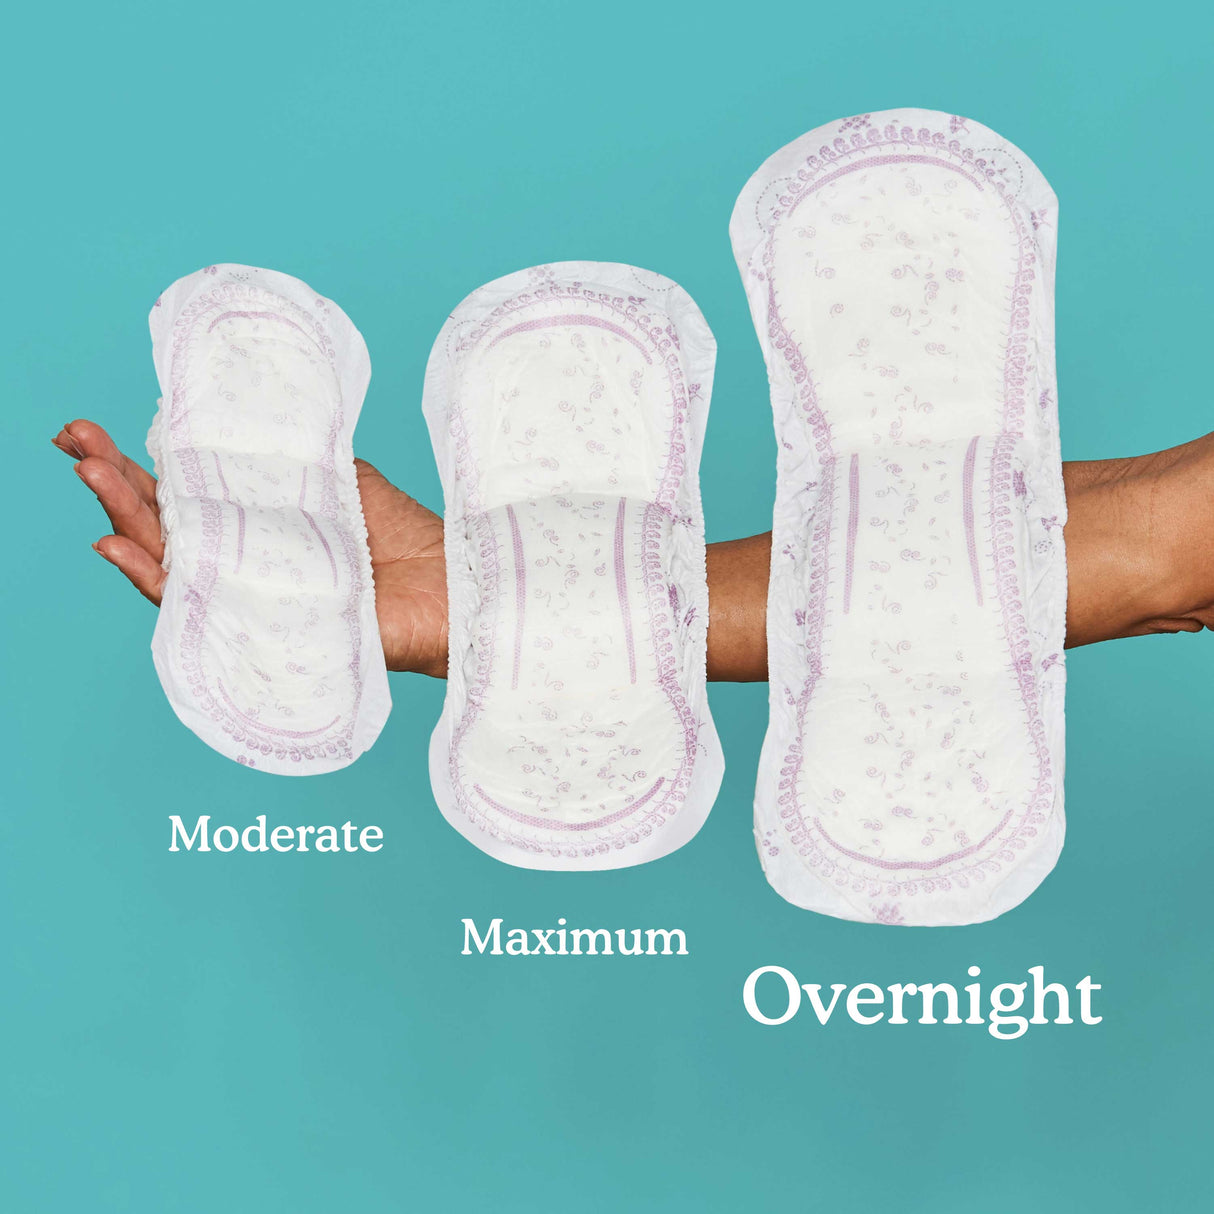 Overnight Incontinence Pads for Women - Premium Absorbency